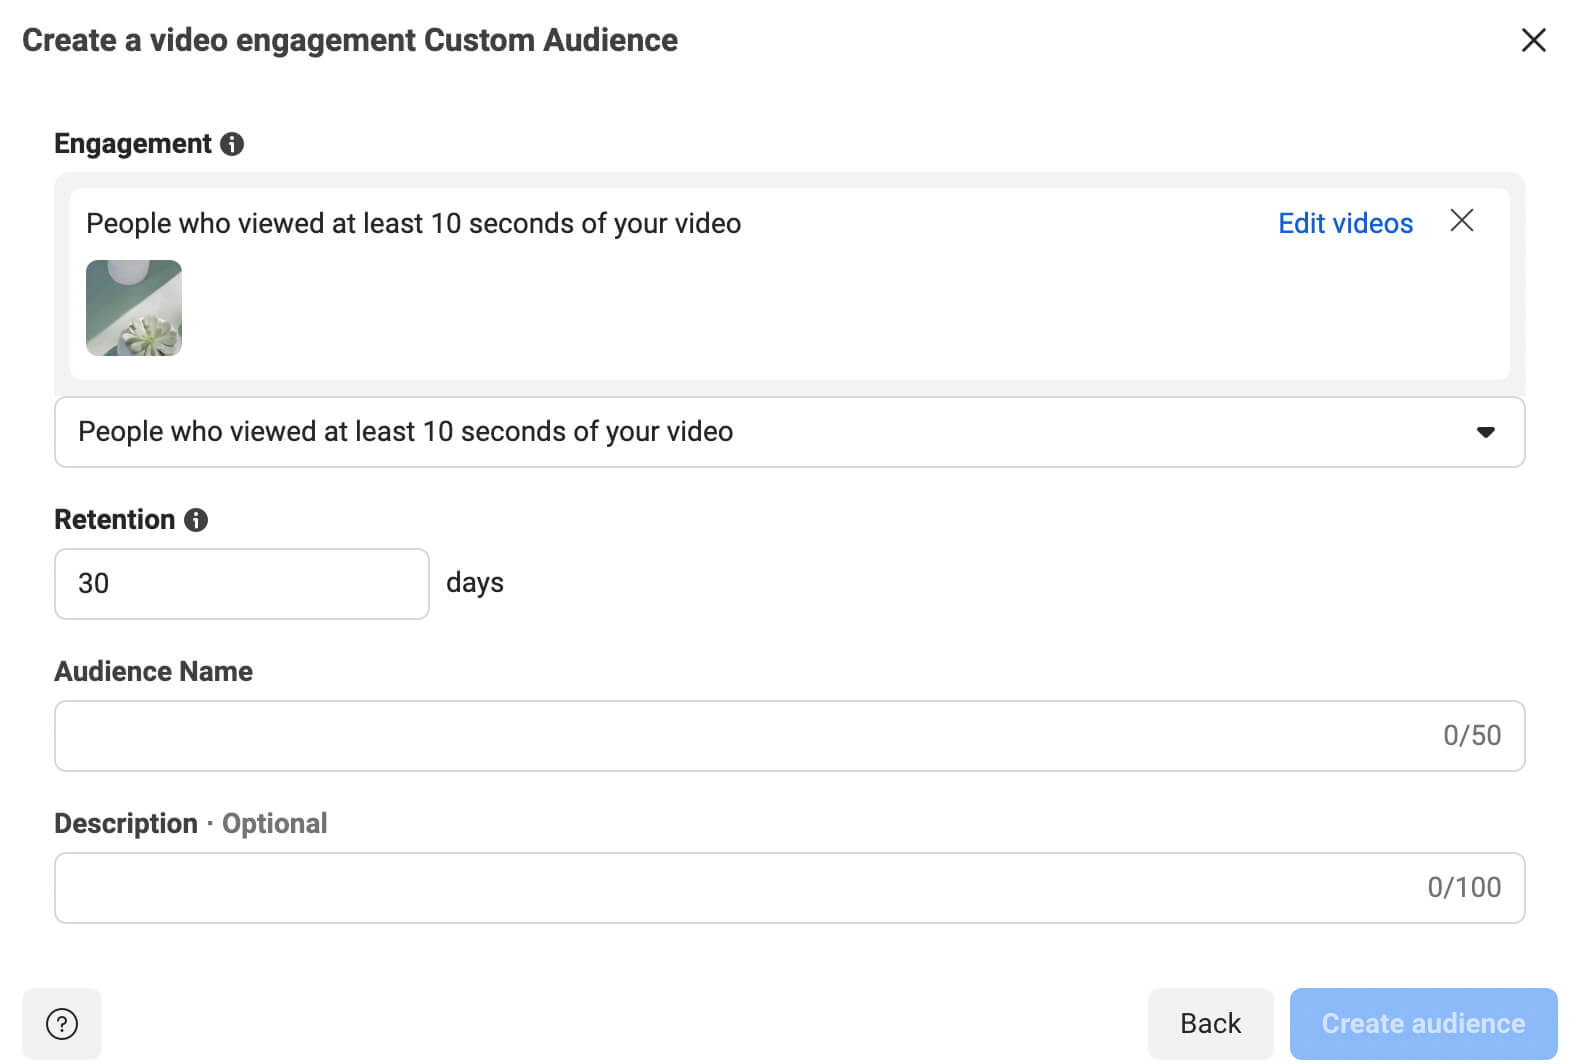 how-to-target-competitors-directly-on-instagram-remarket-to-audiences-video-engagement-custom-example-12